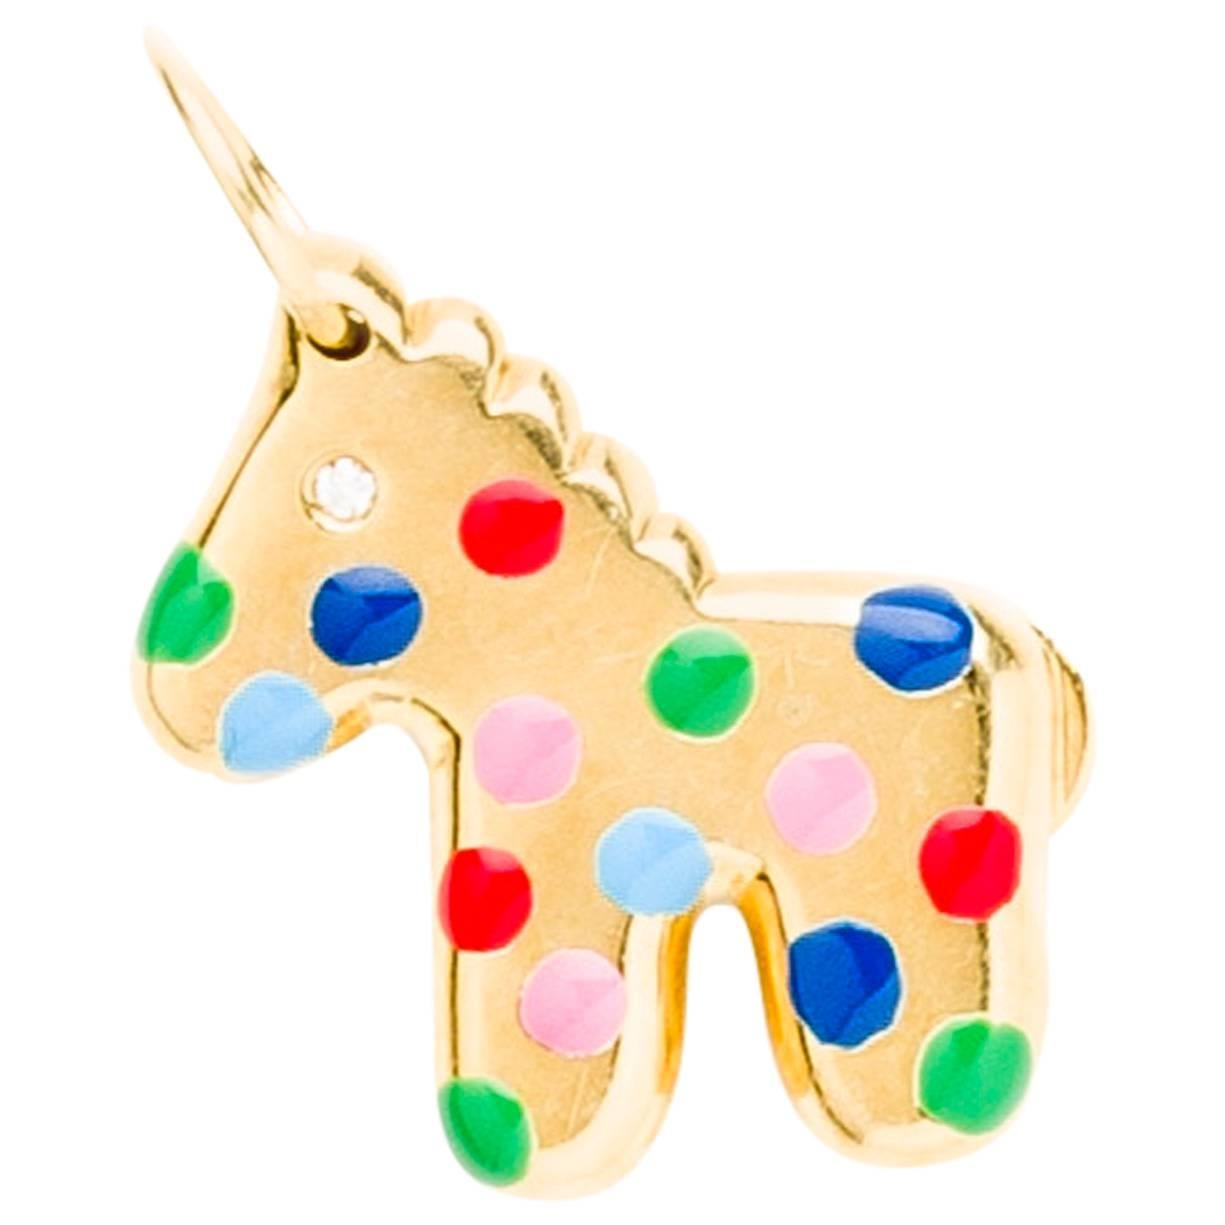 Solid Gold Horse Pendant With Enamel Polka Dots